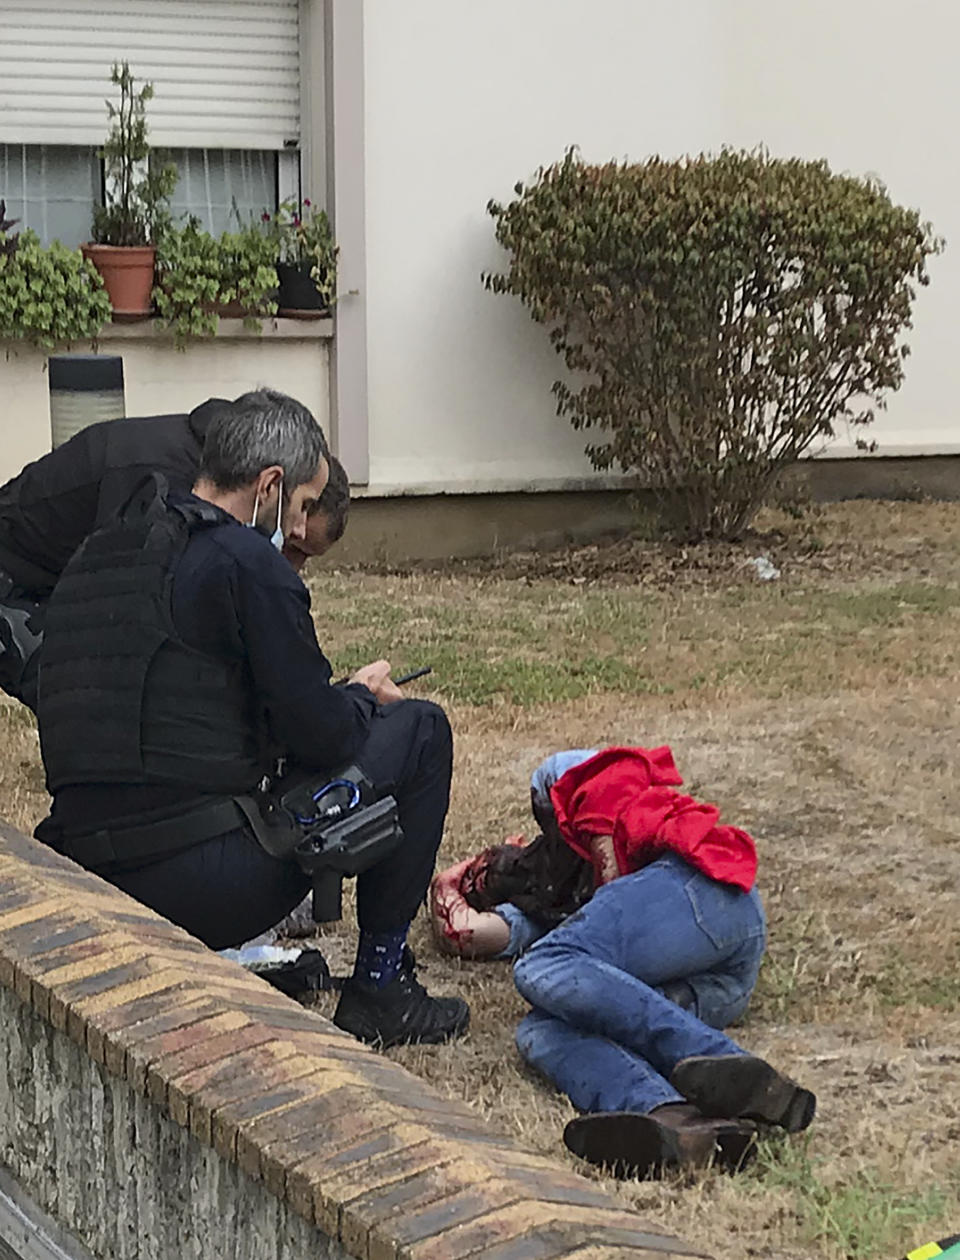 A man is tended to after being injured in a knife attack in Paris, Friday, Sept. 25, 2020. French terrorism authorities are investigating the knife attack that wounded at least two people Friday near the former offices of the satirical newspaper Charlie Hebdo in Paris, authorities said. A suspect has been arrested. (David Cohen via AP)